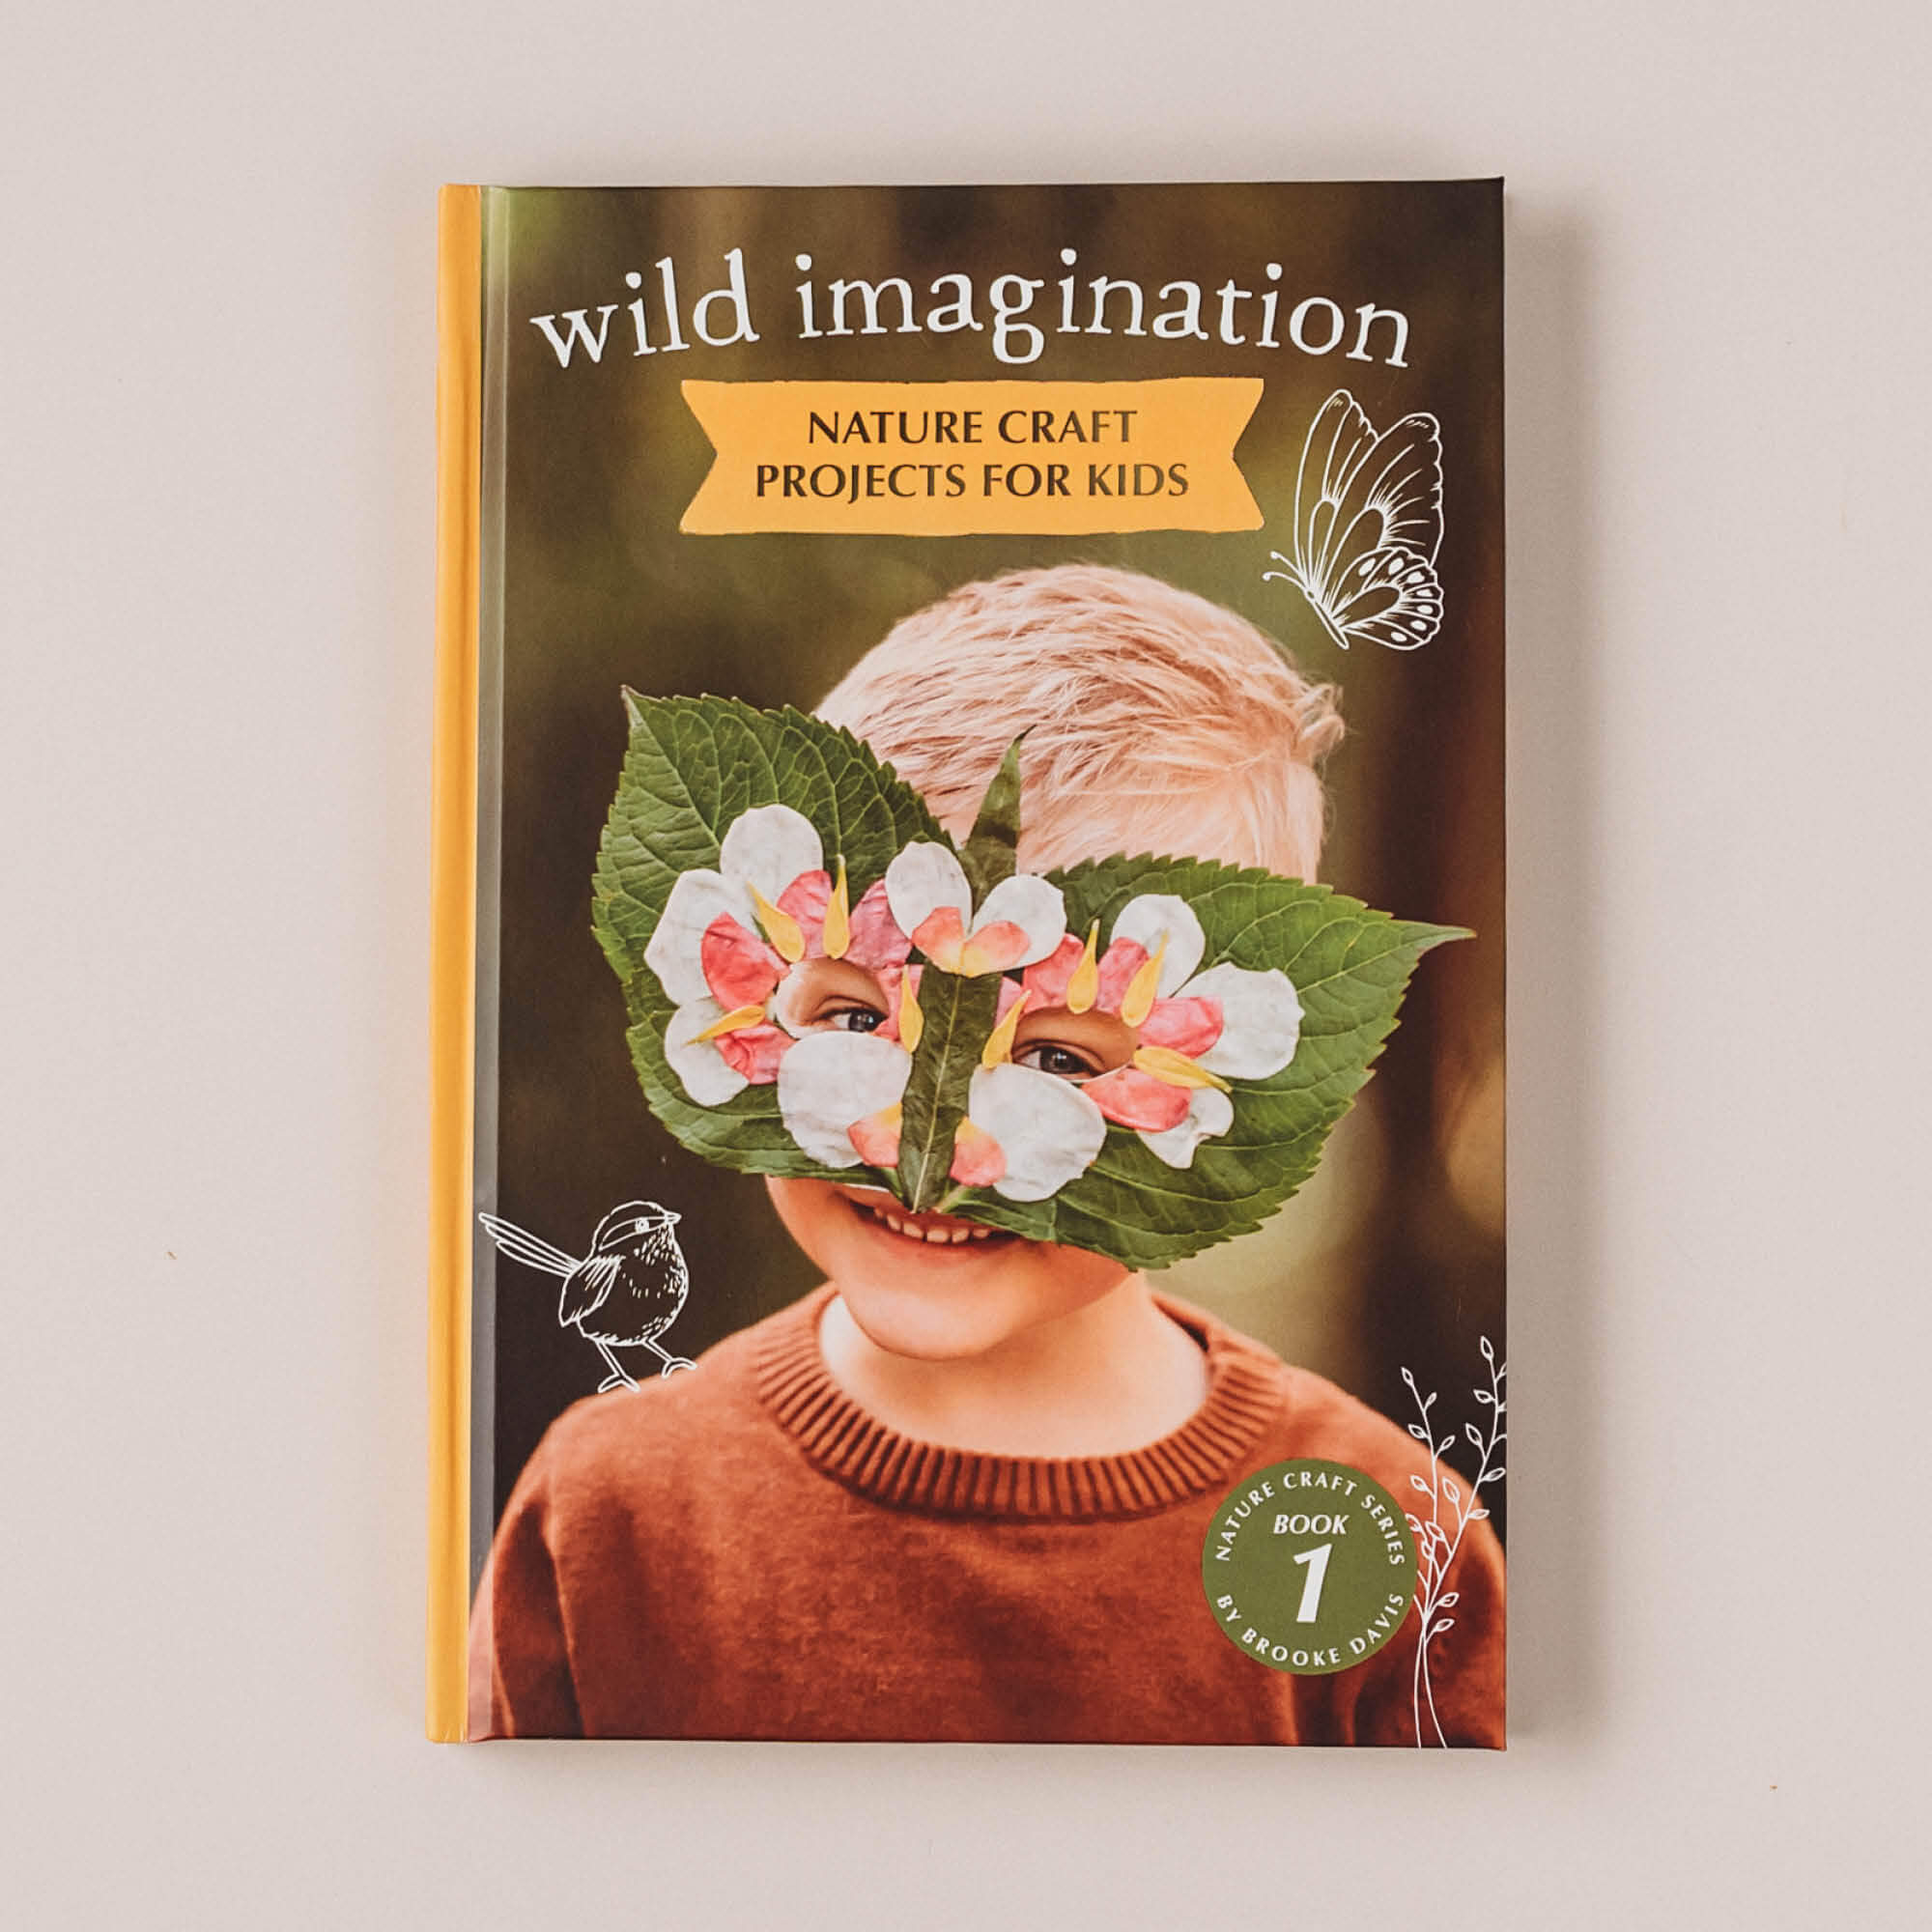 years　for　kids　craft　Your　Book　Wild　Imagination　Books　3-12　Nature　projects　Wild